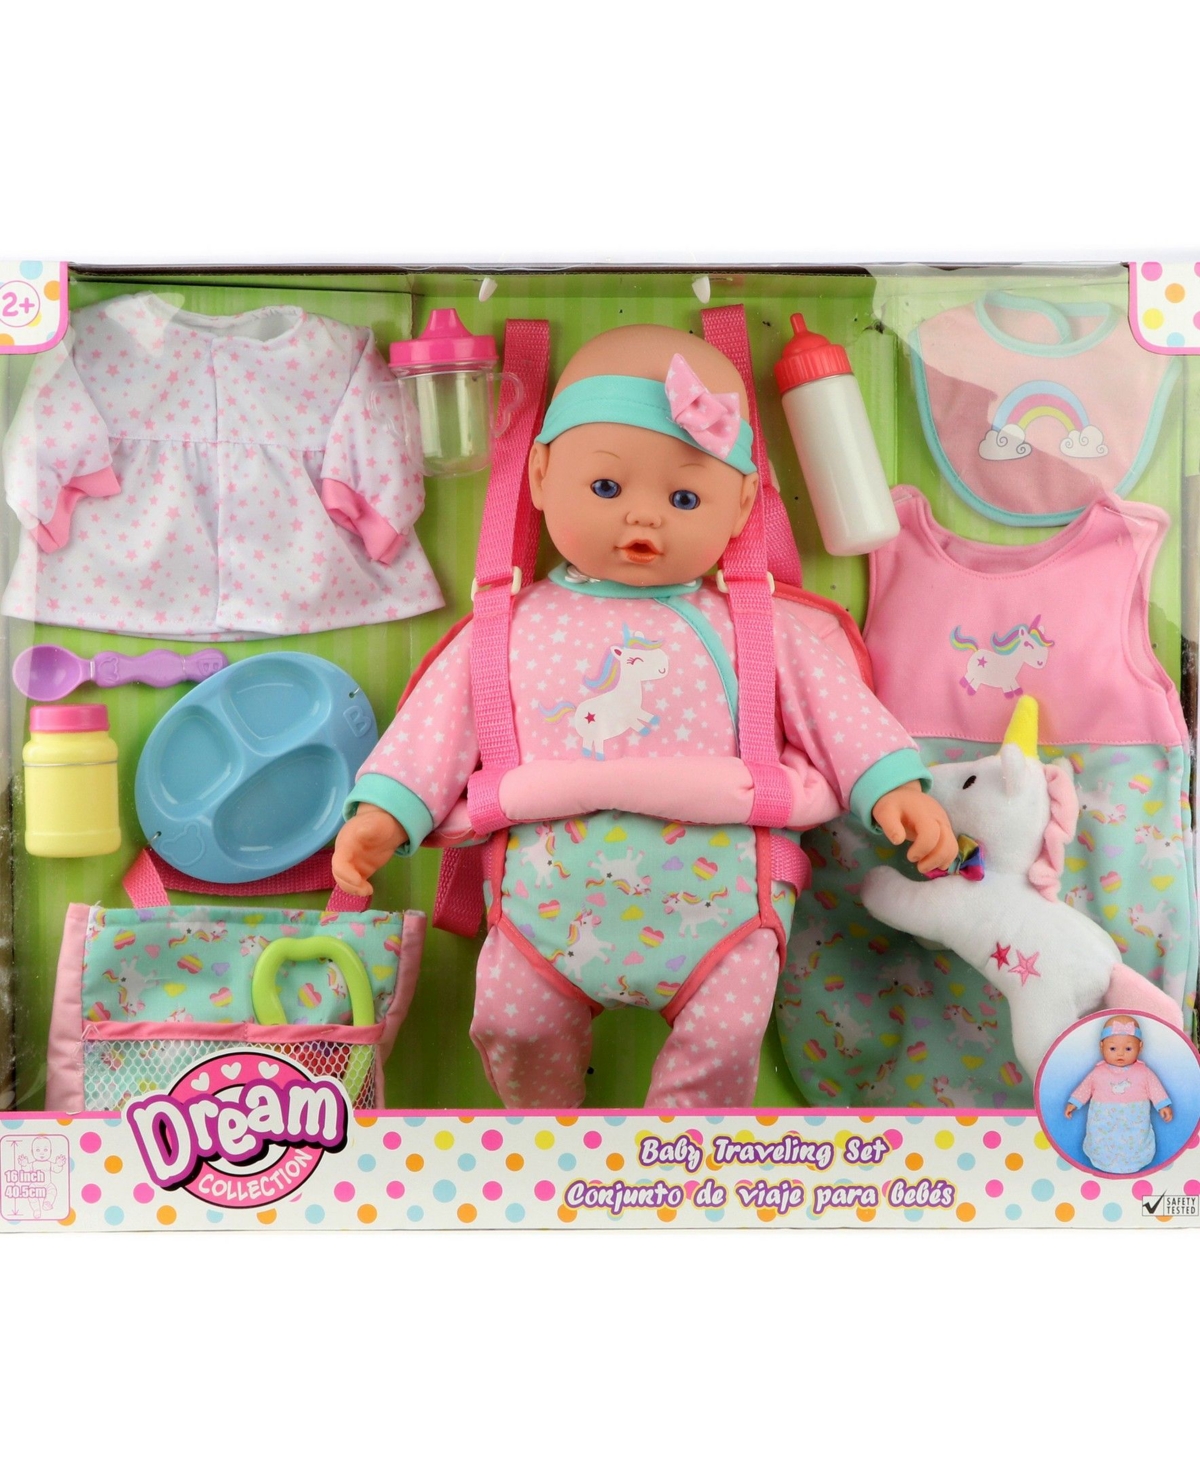 Redbox Dream Collection 16" Baby Doll Travelling Set In Multi